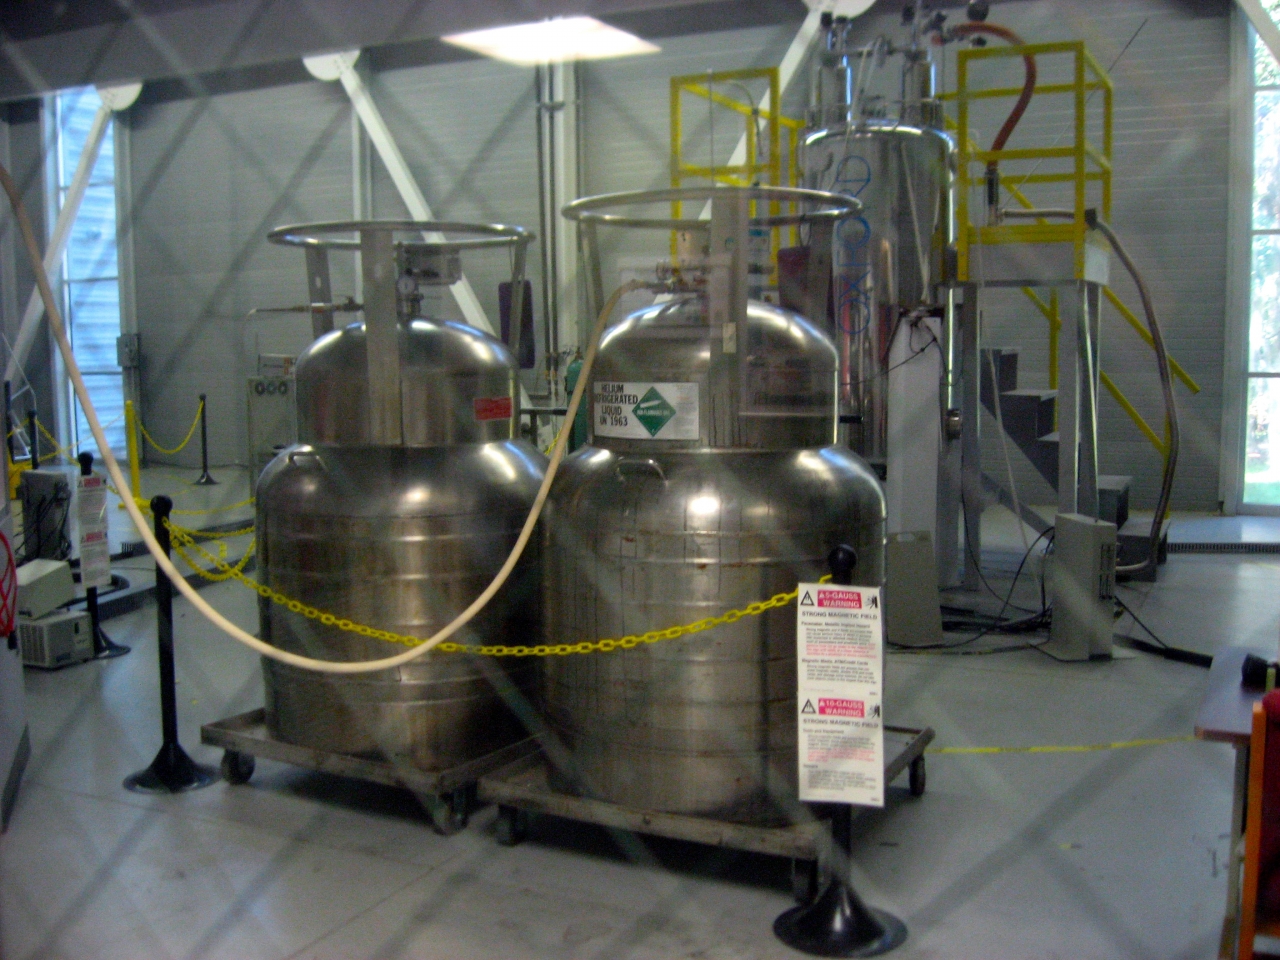 Refrigerated helium tanks in the Nuclear Magnetic Resonance wing.